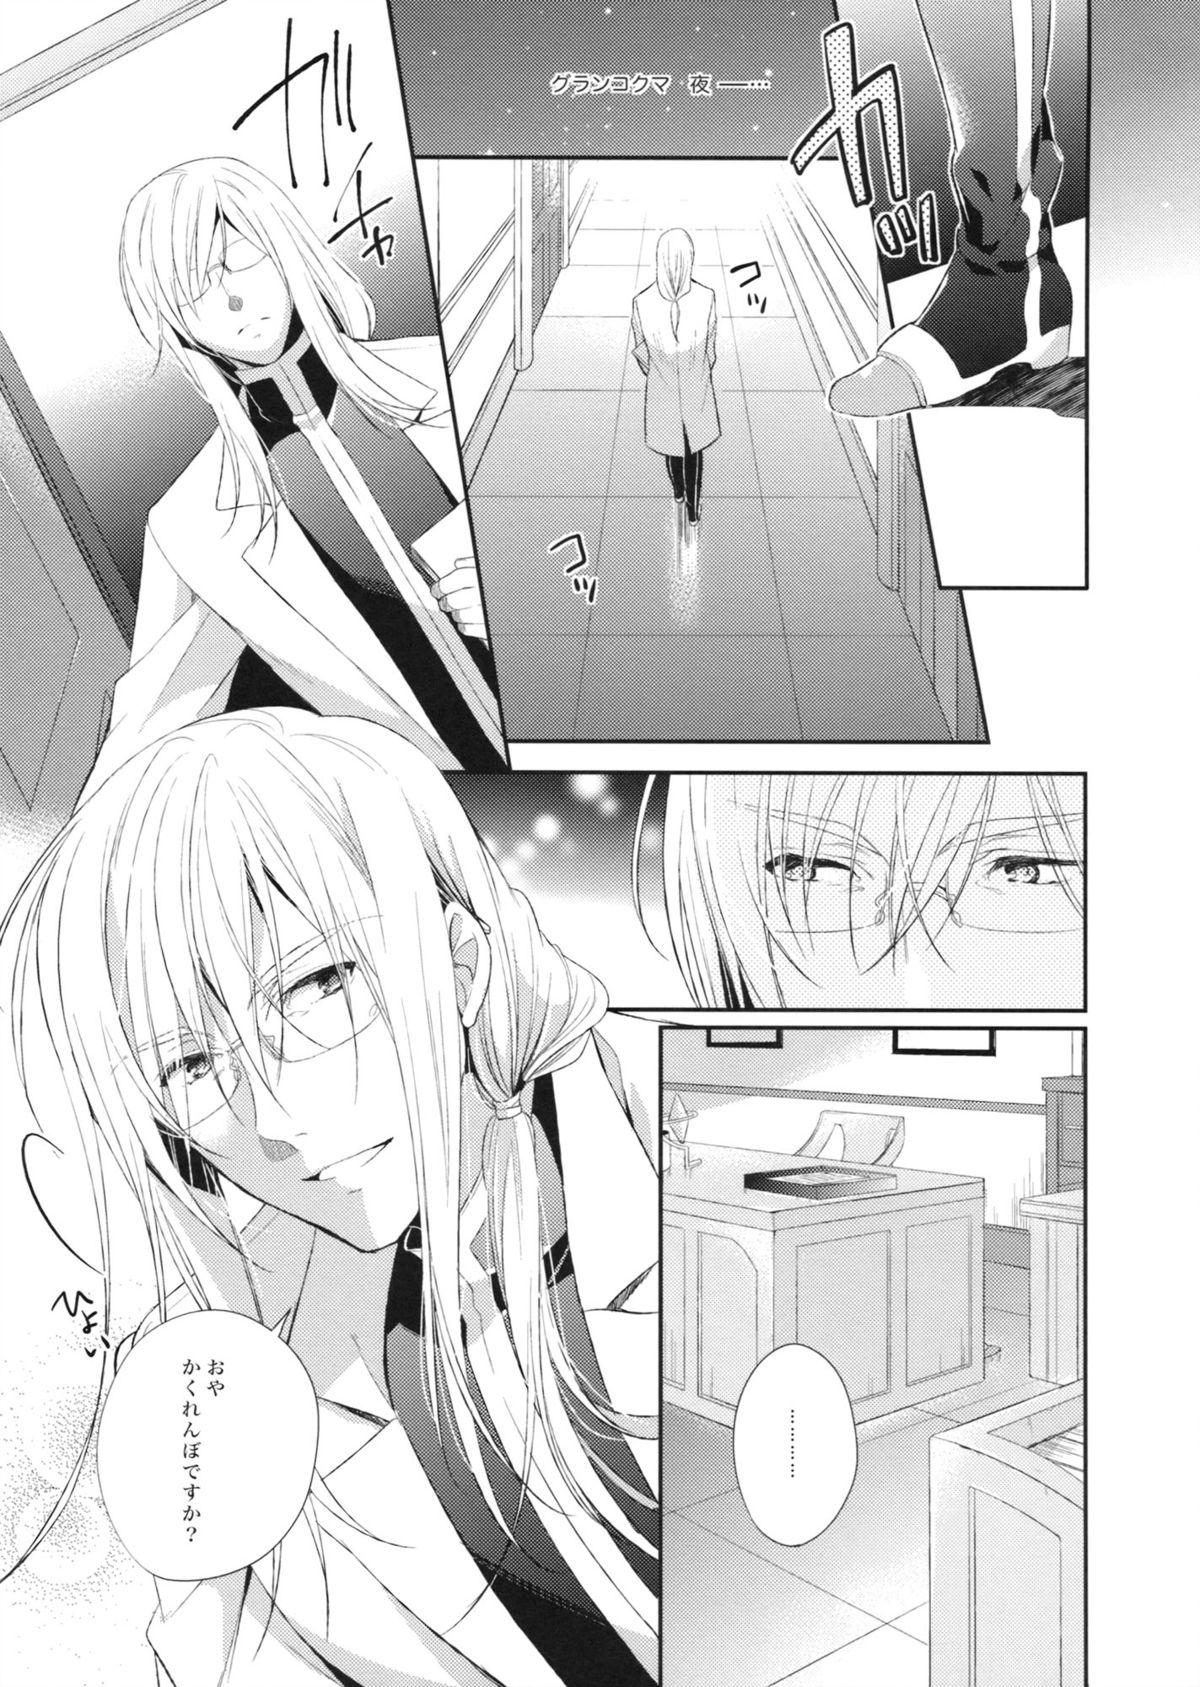 Jocks Oose no Mama ni - Tales of the abyss Spanking - Page 2